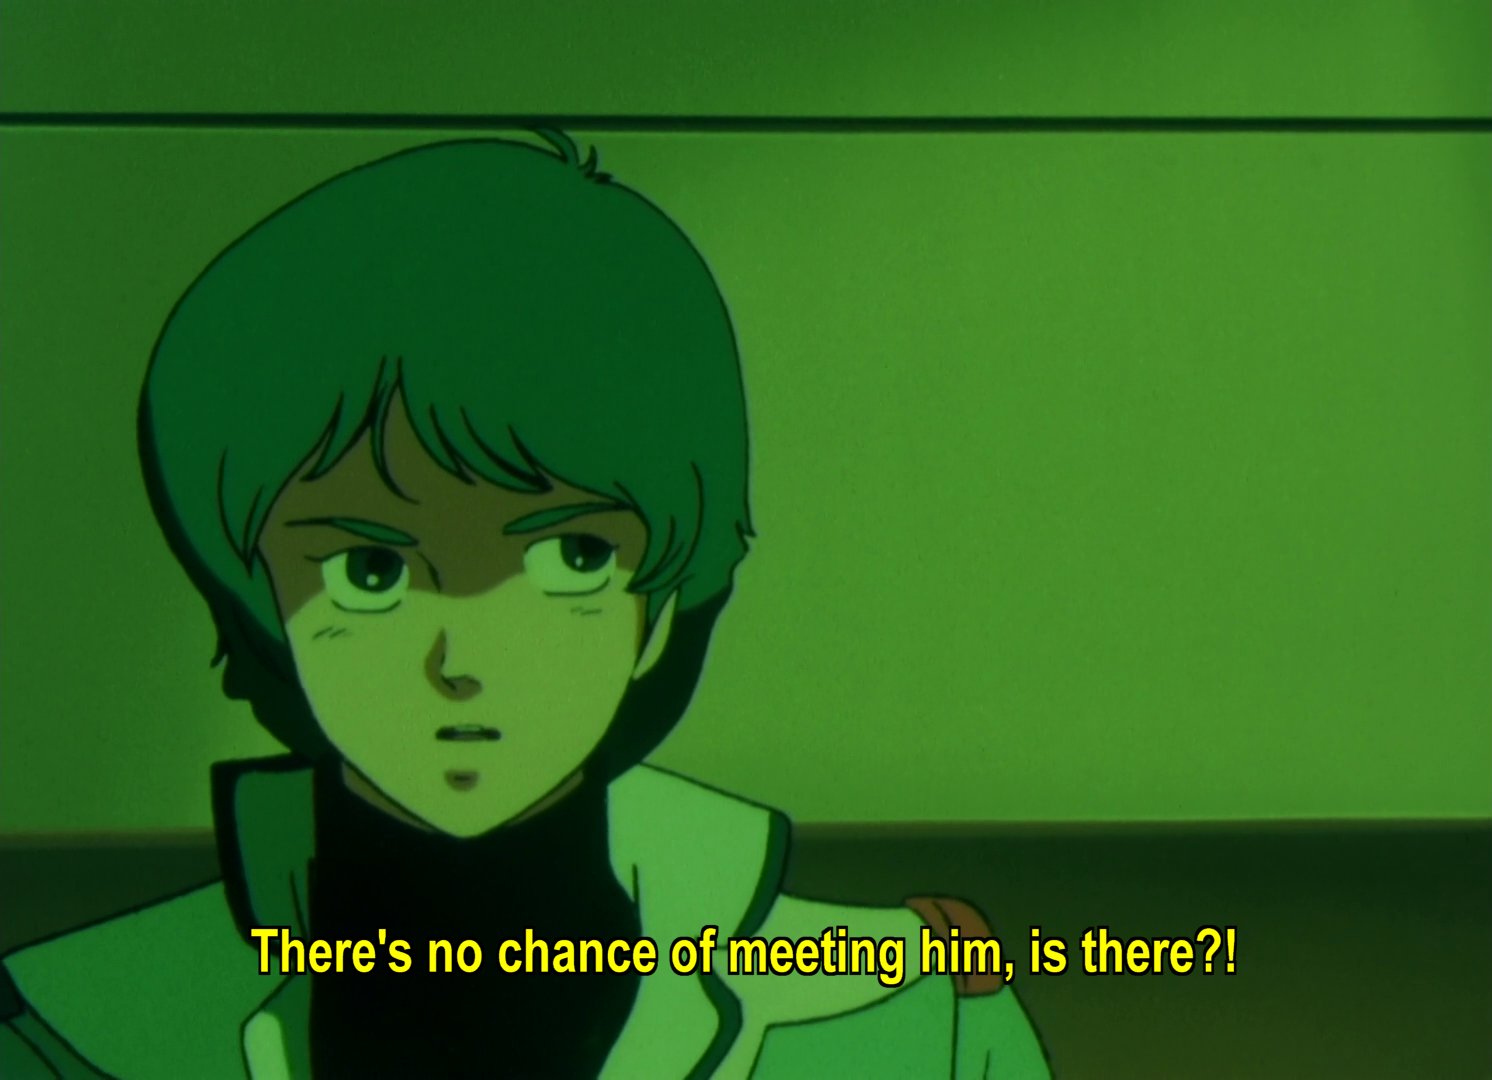 Kamille: There's no chance of meeting him, is there?!